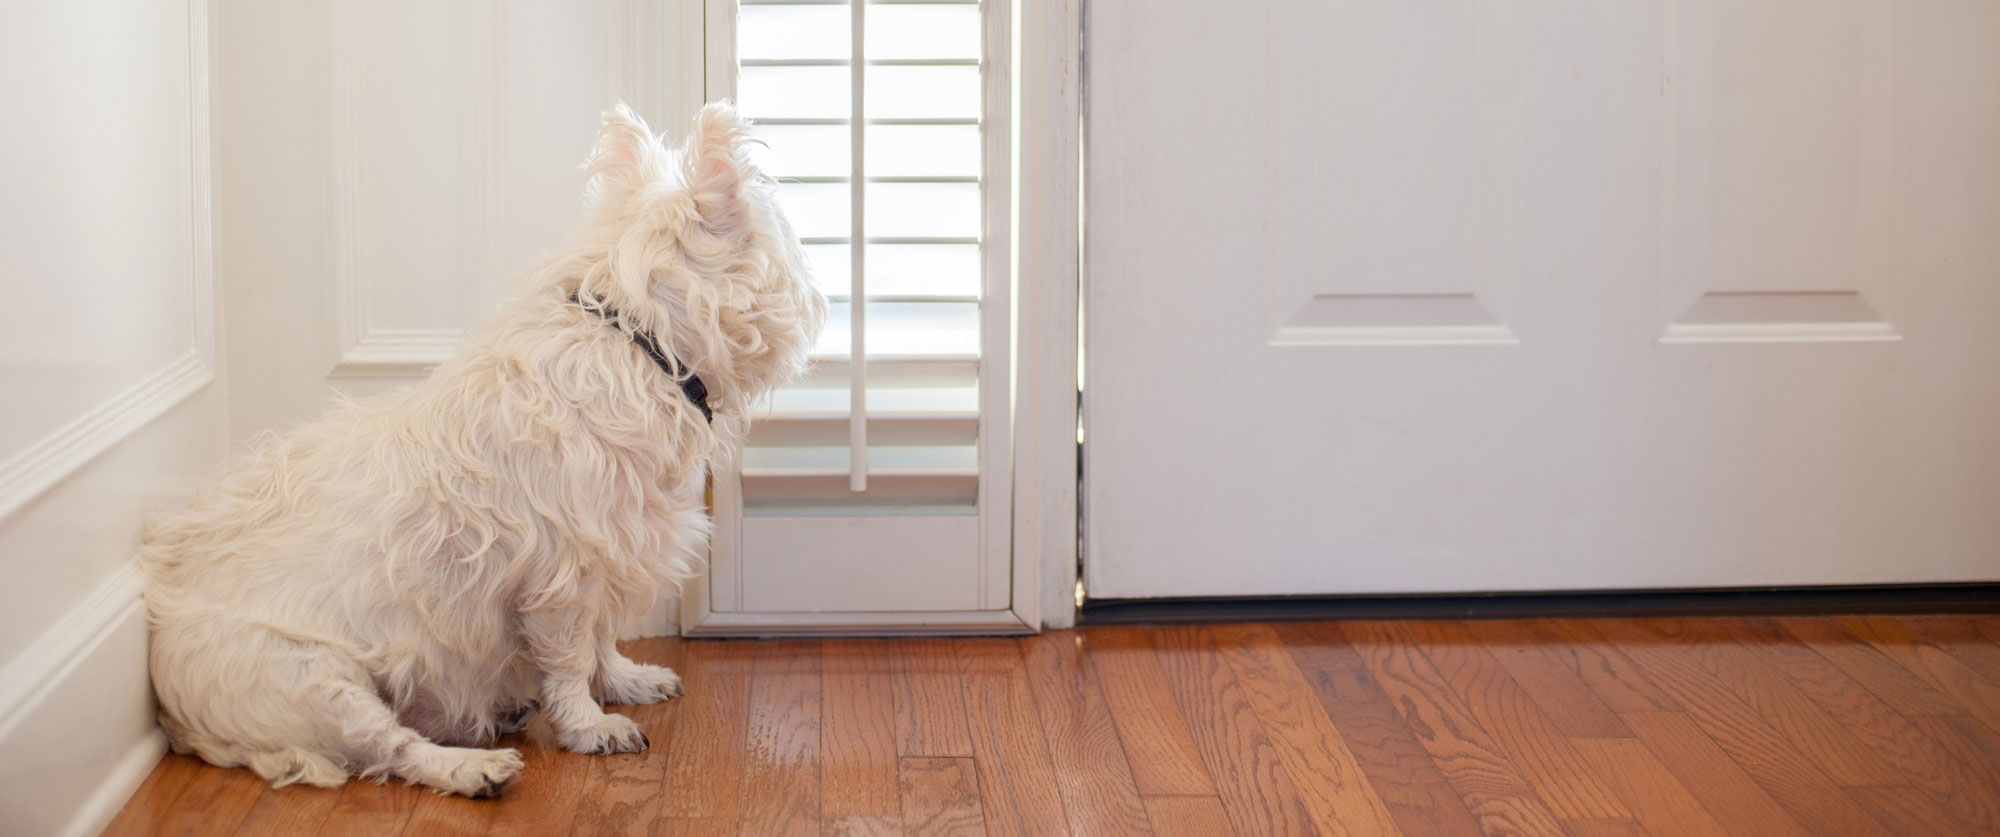 A small white dog sits near the front door of a house, looking expectantly out the window.